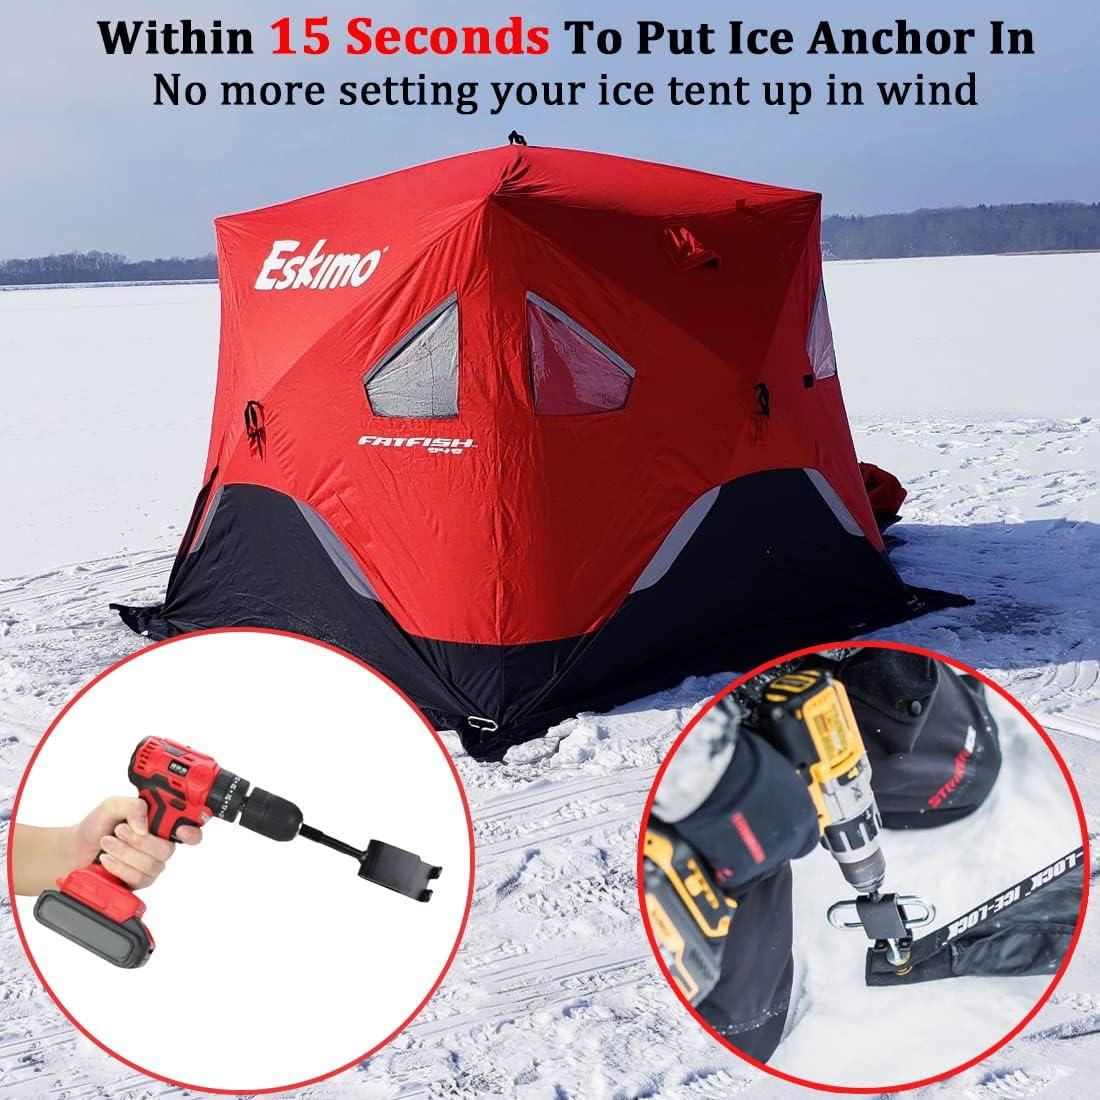 1 Piece Ice Anchor Drill Adapter Anchor Drill Adapter Metal Ice Anchor Tool  Quickly Screw Nails Into Ice Fishing For Ice Shelter